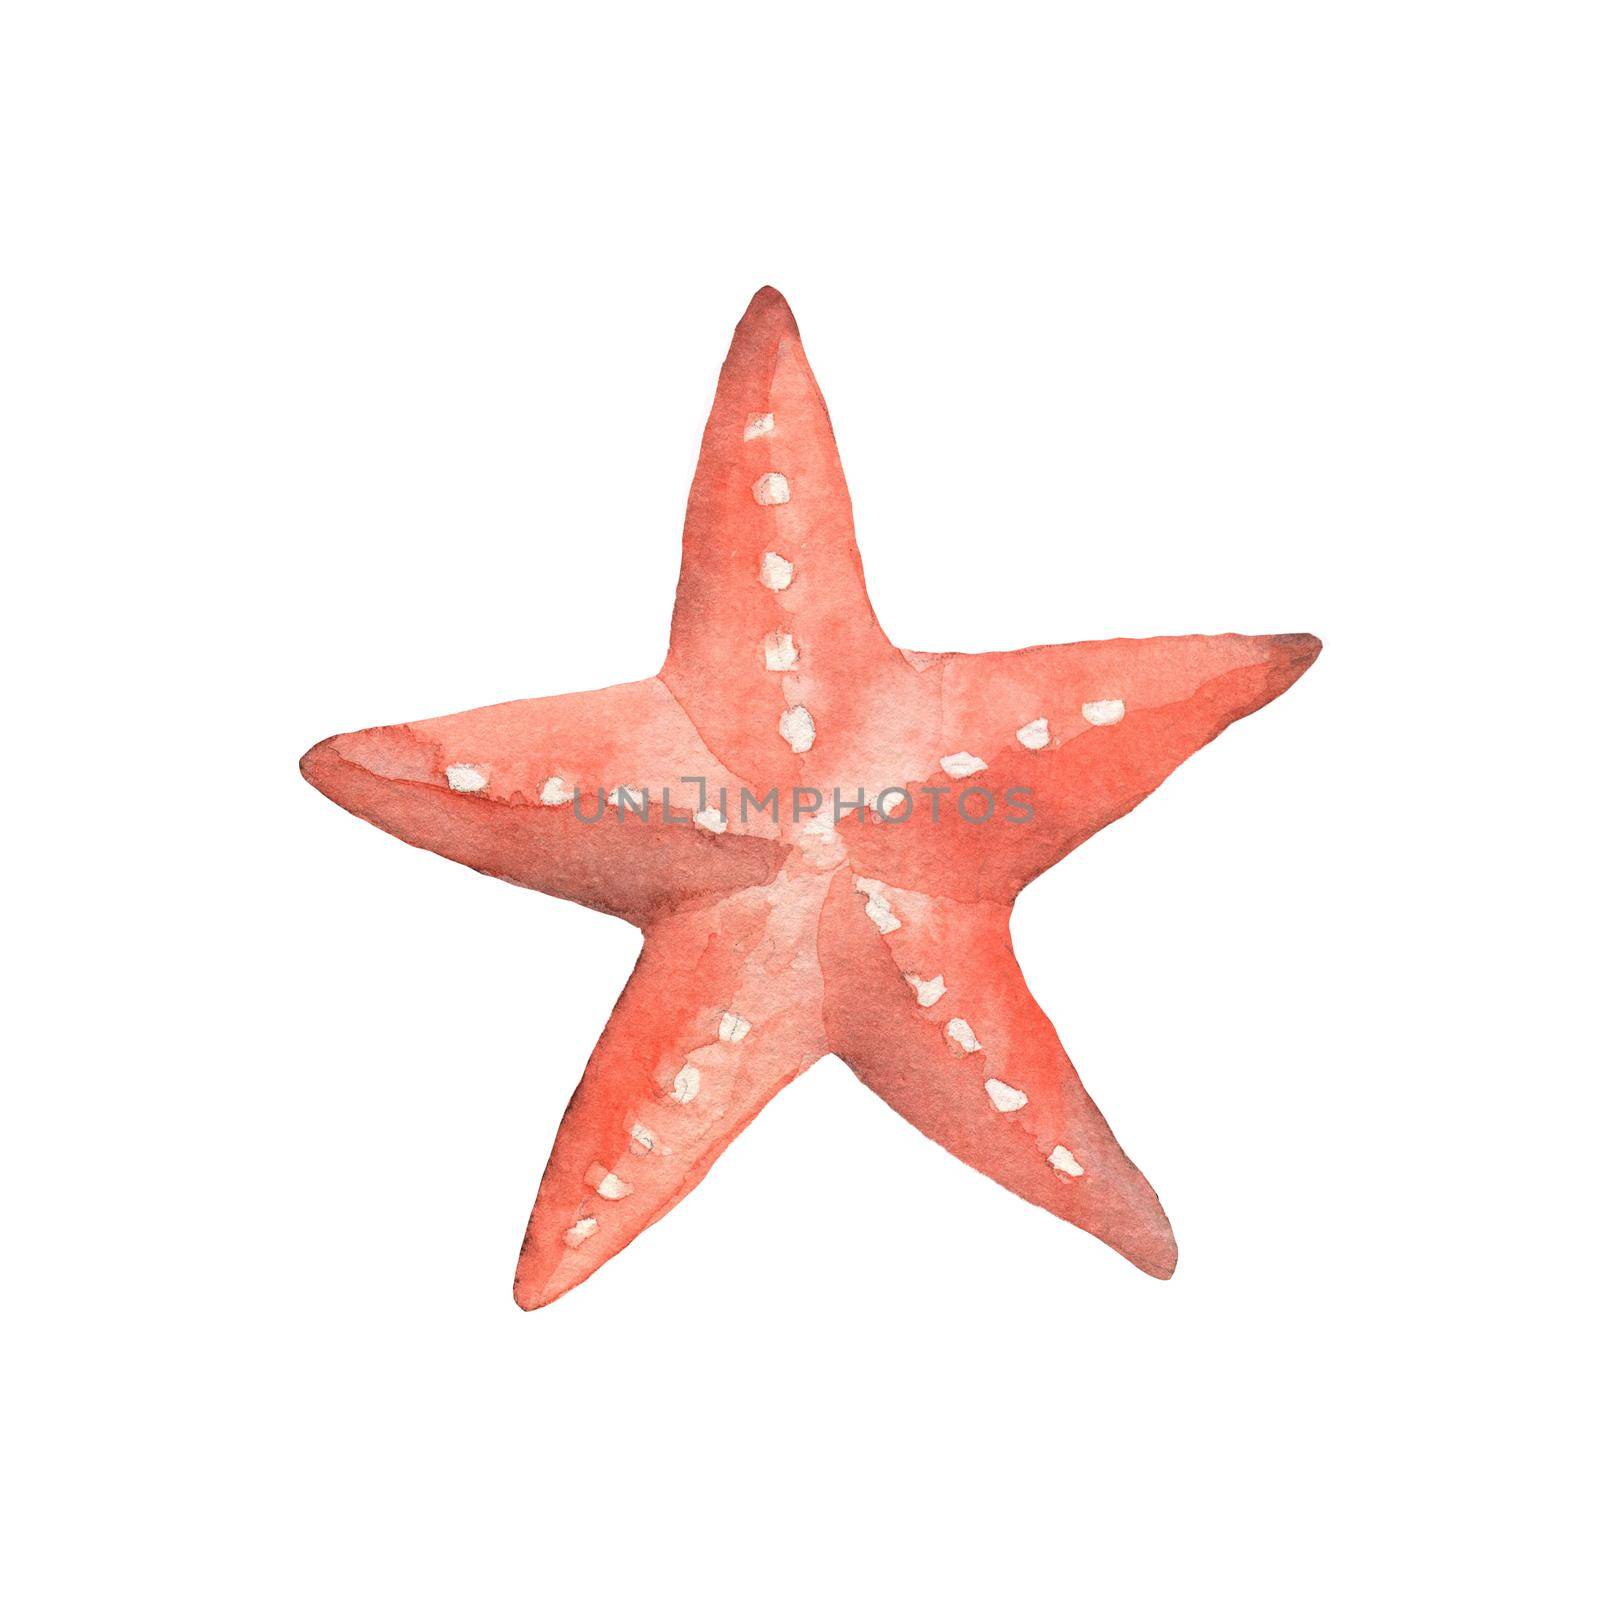 Watercolor sketch of starfish. Hand drawn illustration isolated on white.